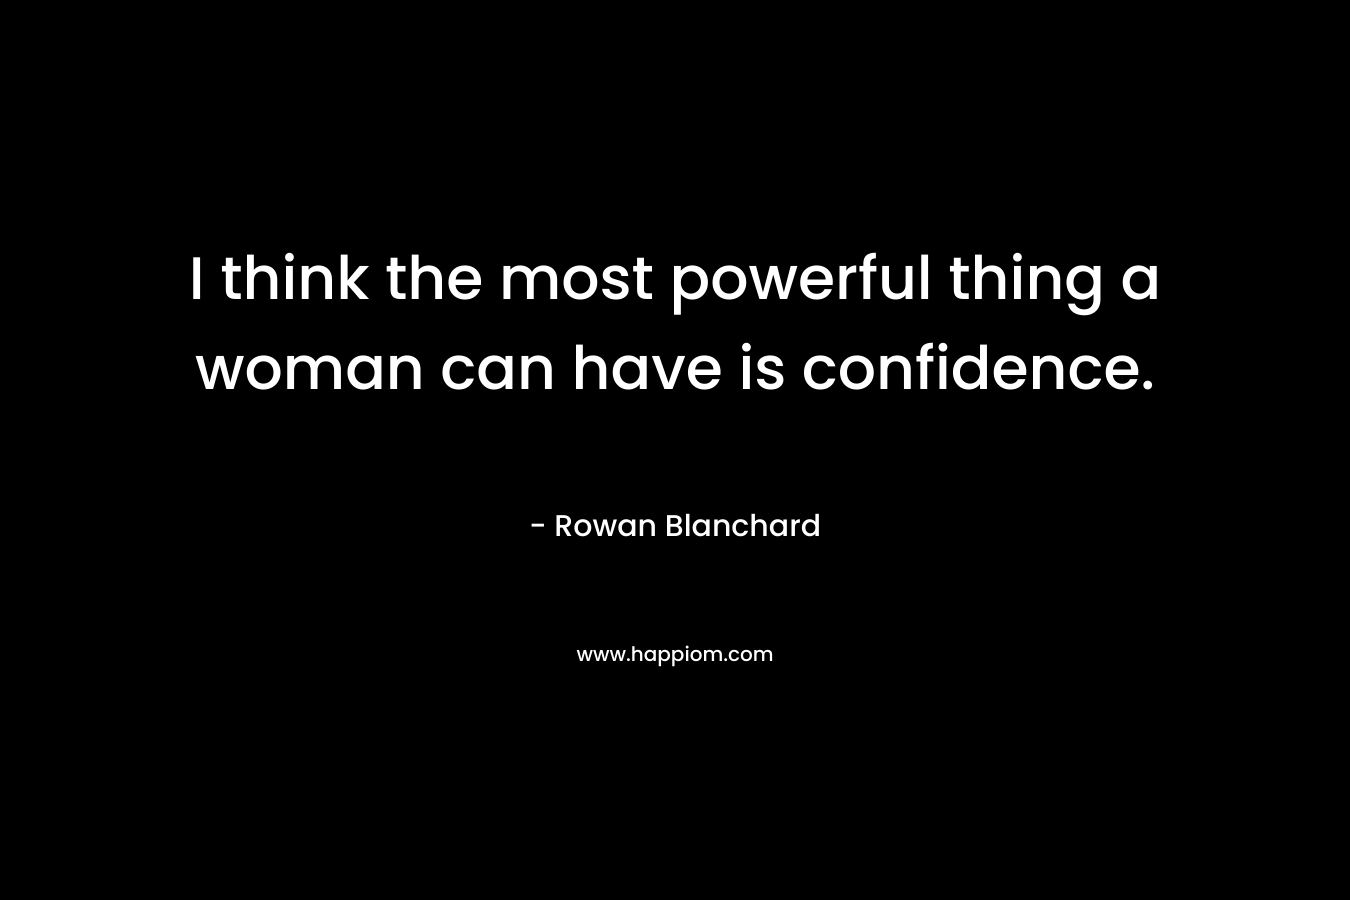 I think the most powerful thing a woman can have is confidence.